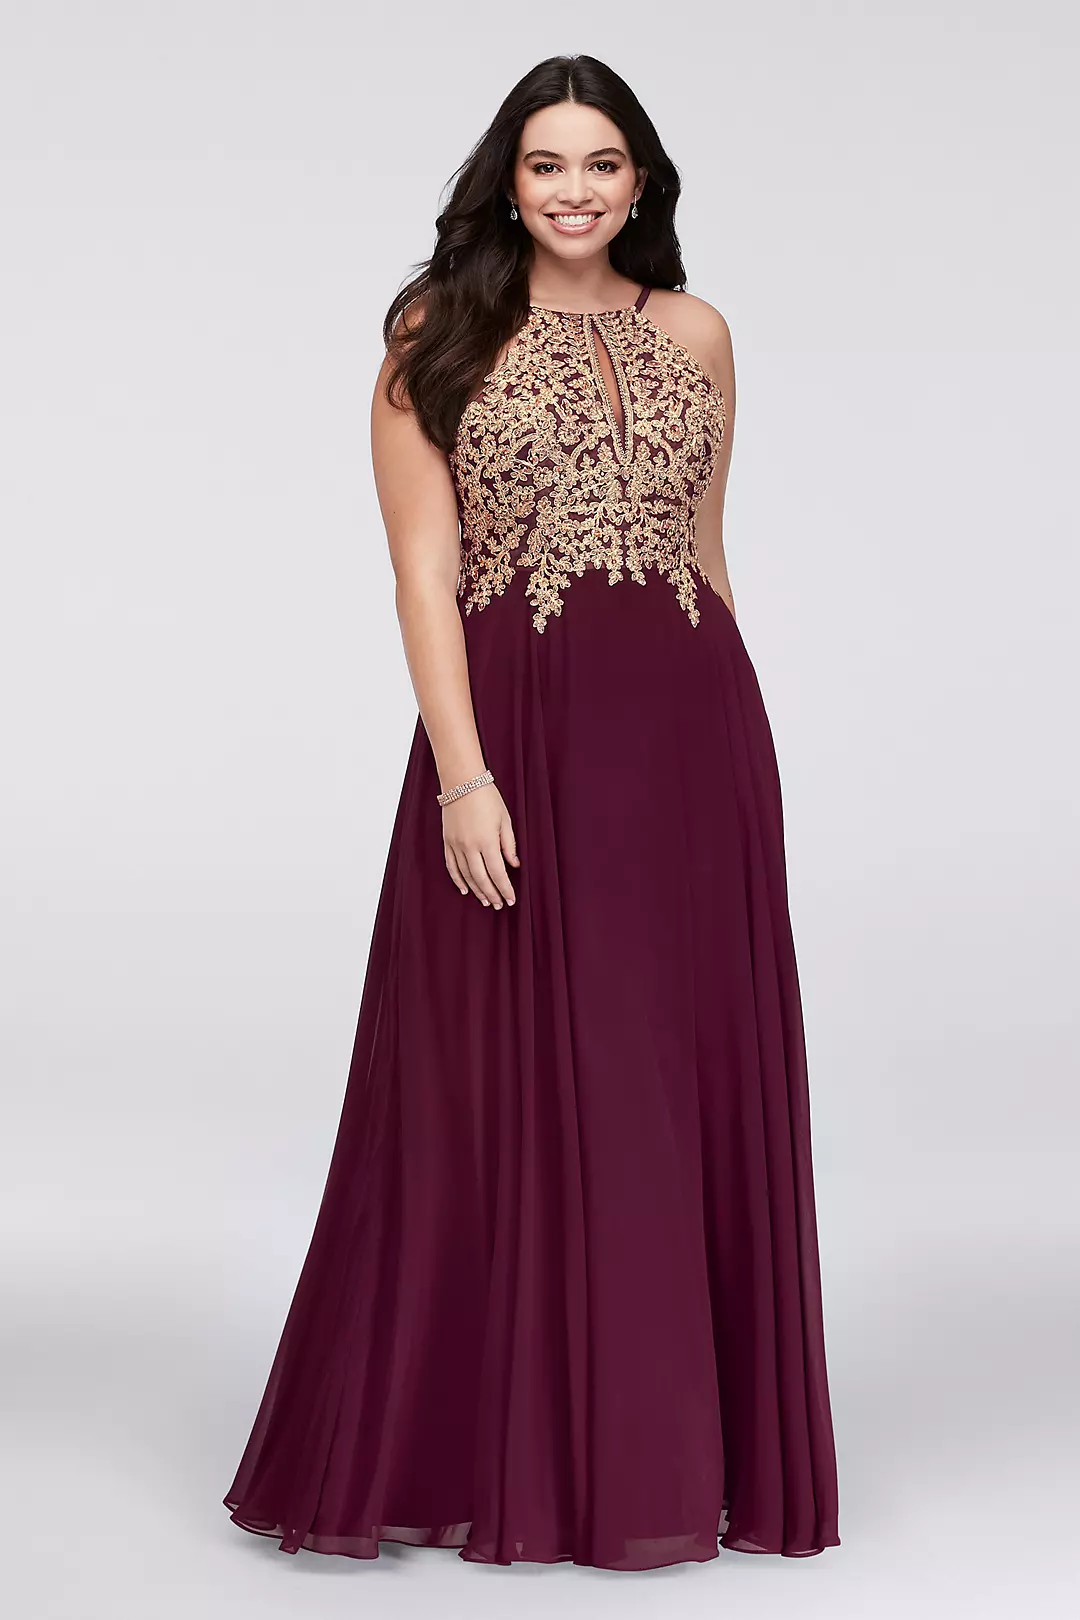 Metallic Corded Lace and Chiffon A-Line Gown Image